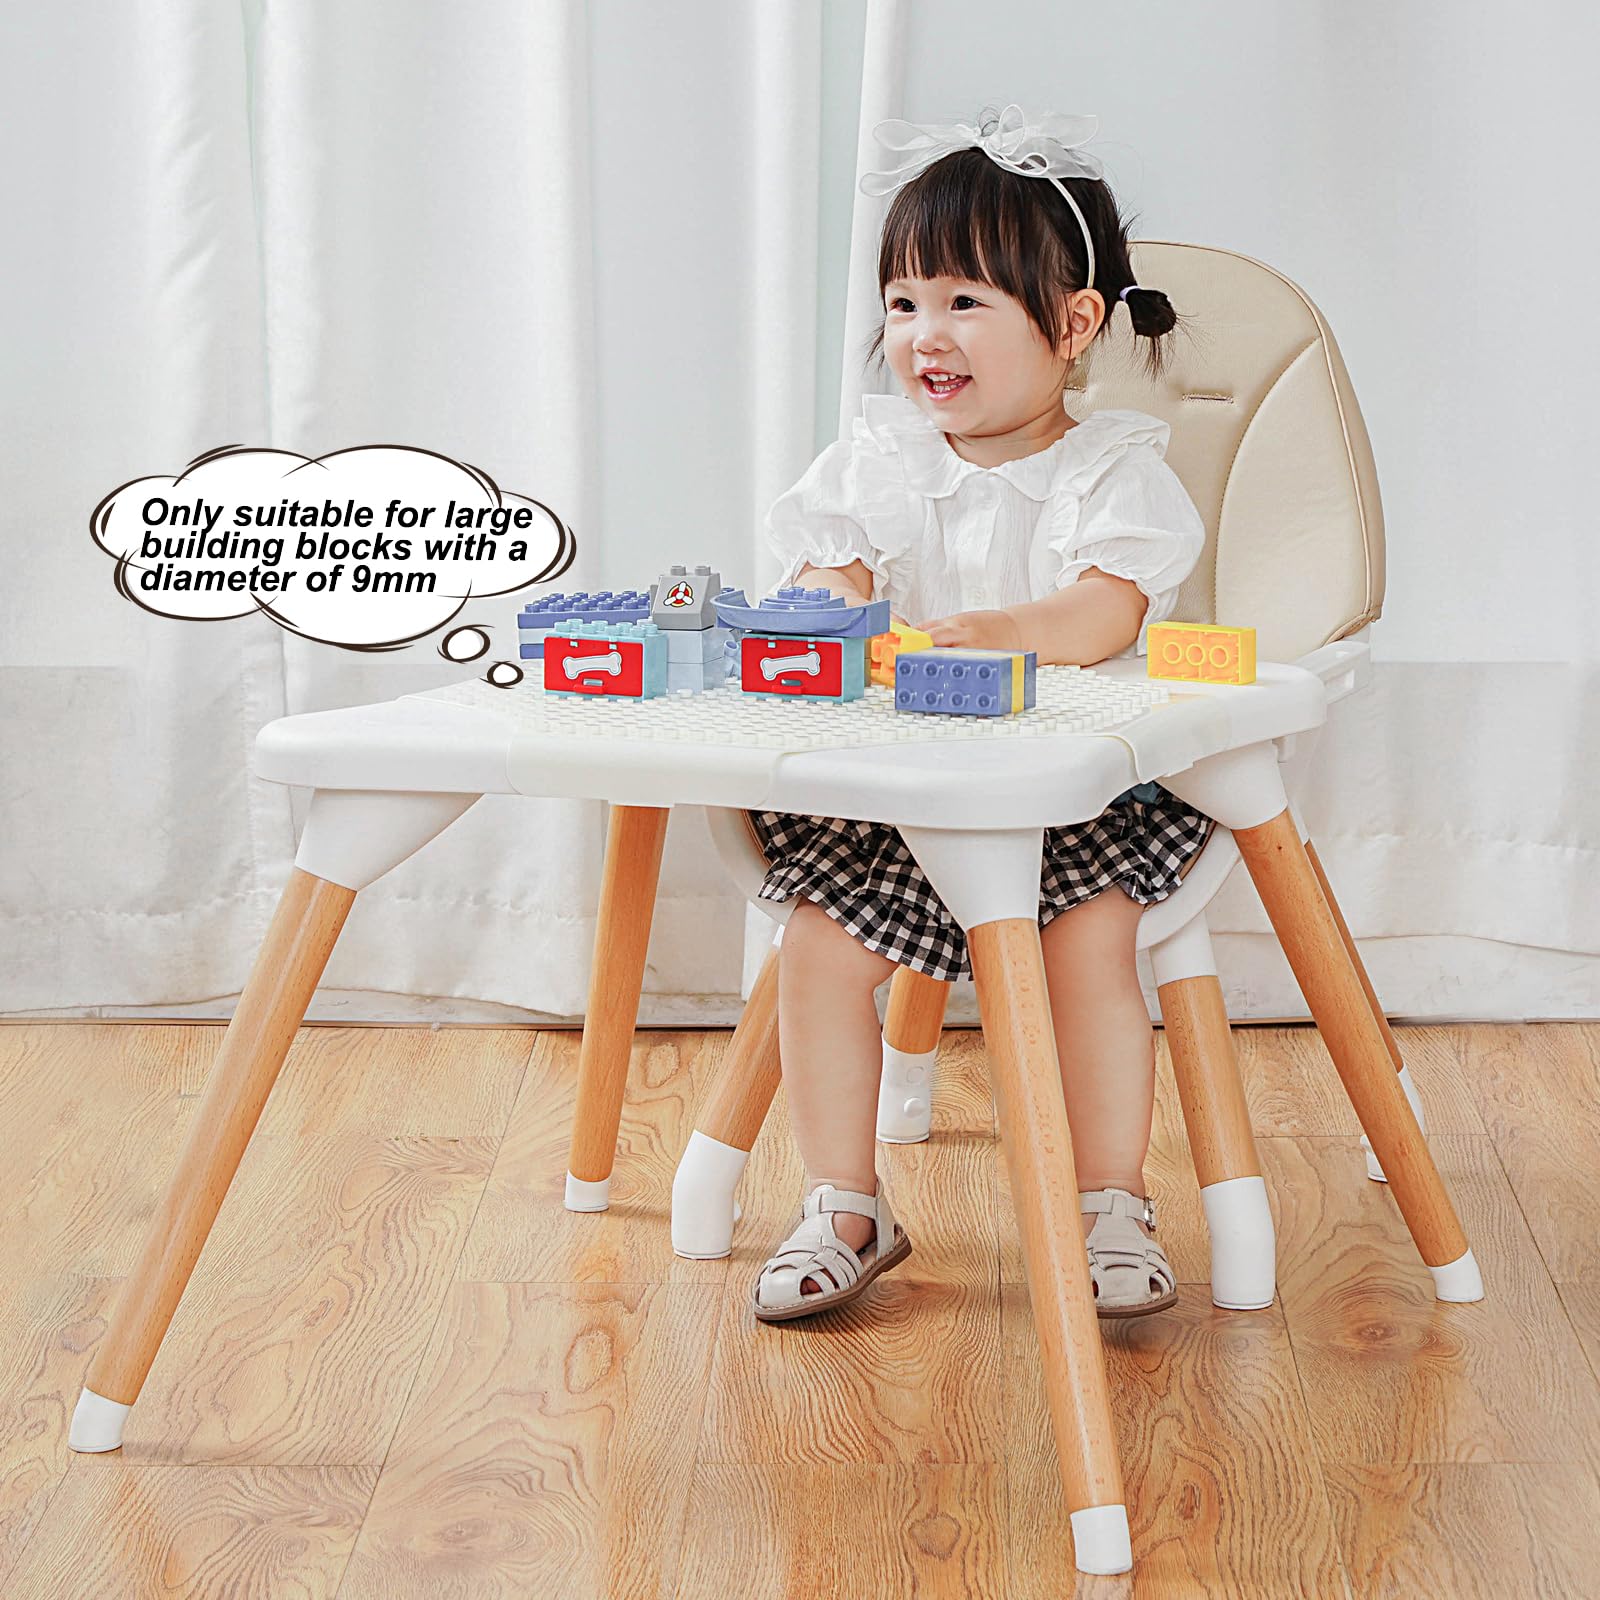 Gofirst 6 in 1 Baby High Chair,Convertible Wooden High Chairs for Babies and Toddlers,Infant Dining Booster Seat,Building Block Table/Baby Highchair 4-Position Removable Baby Feeding Chair